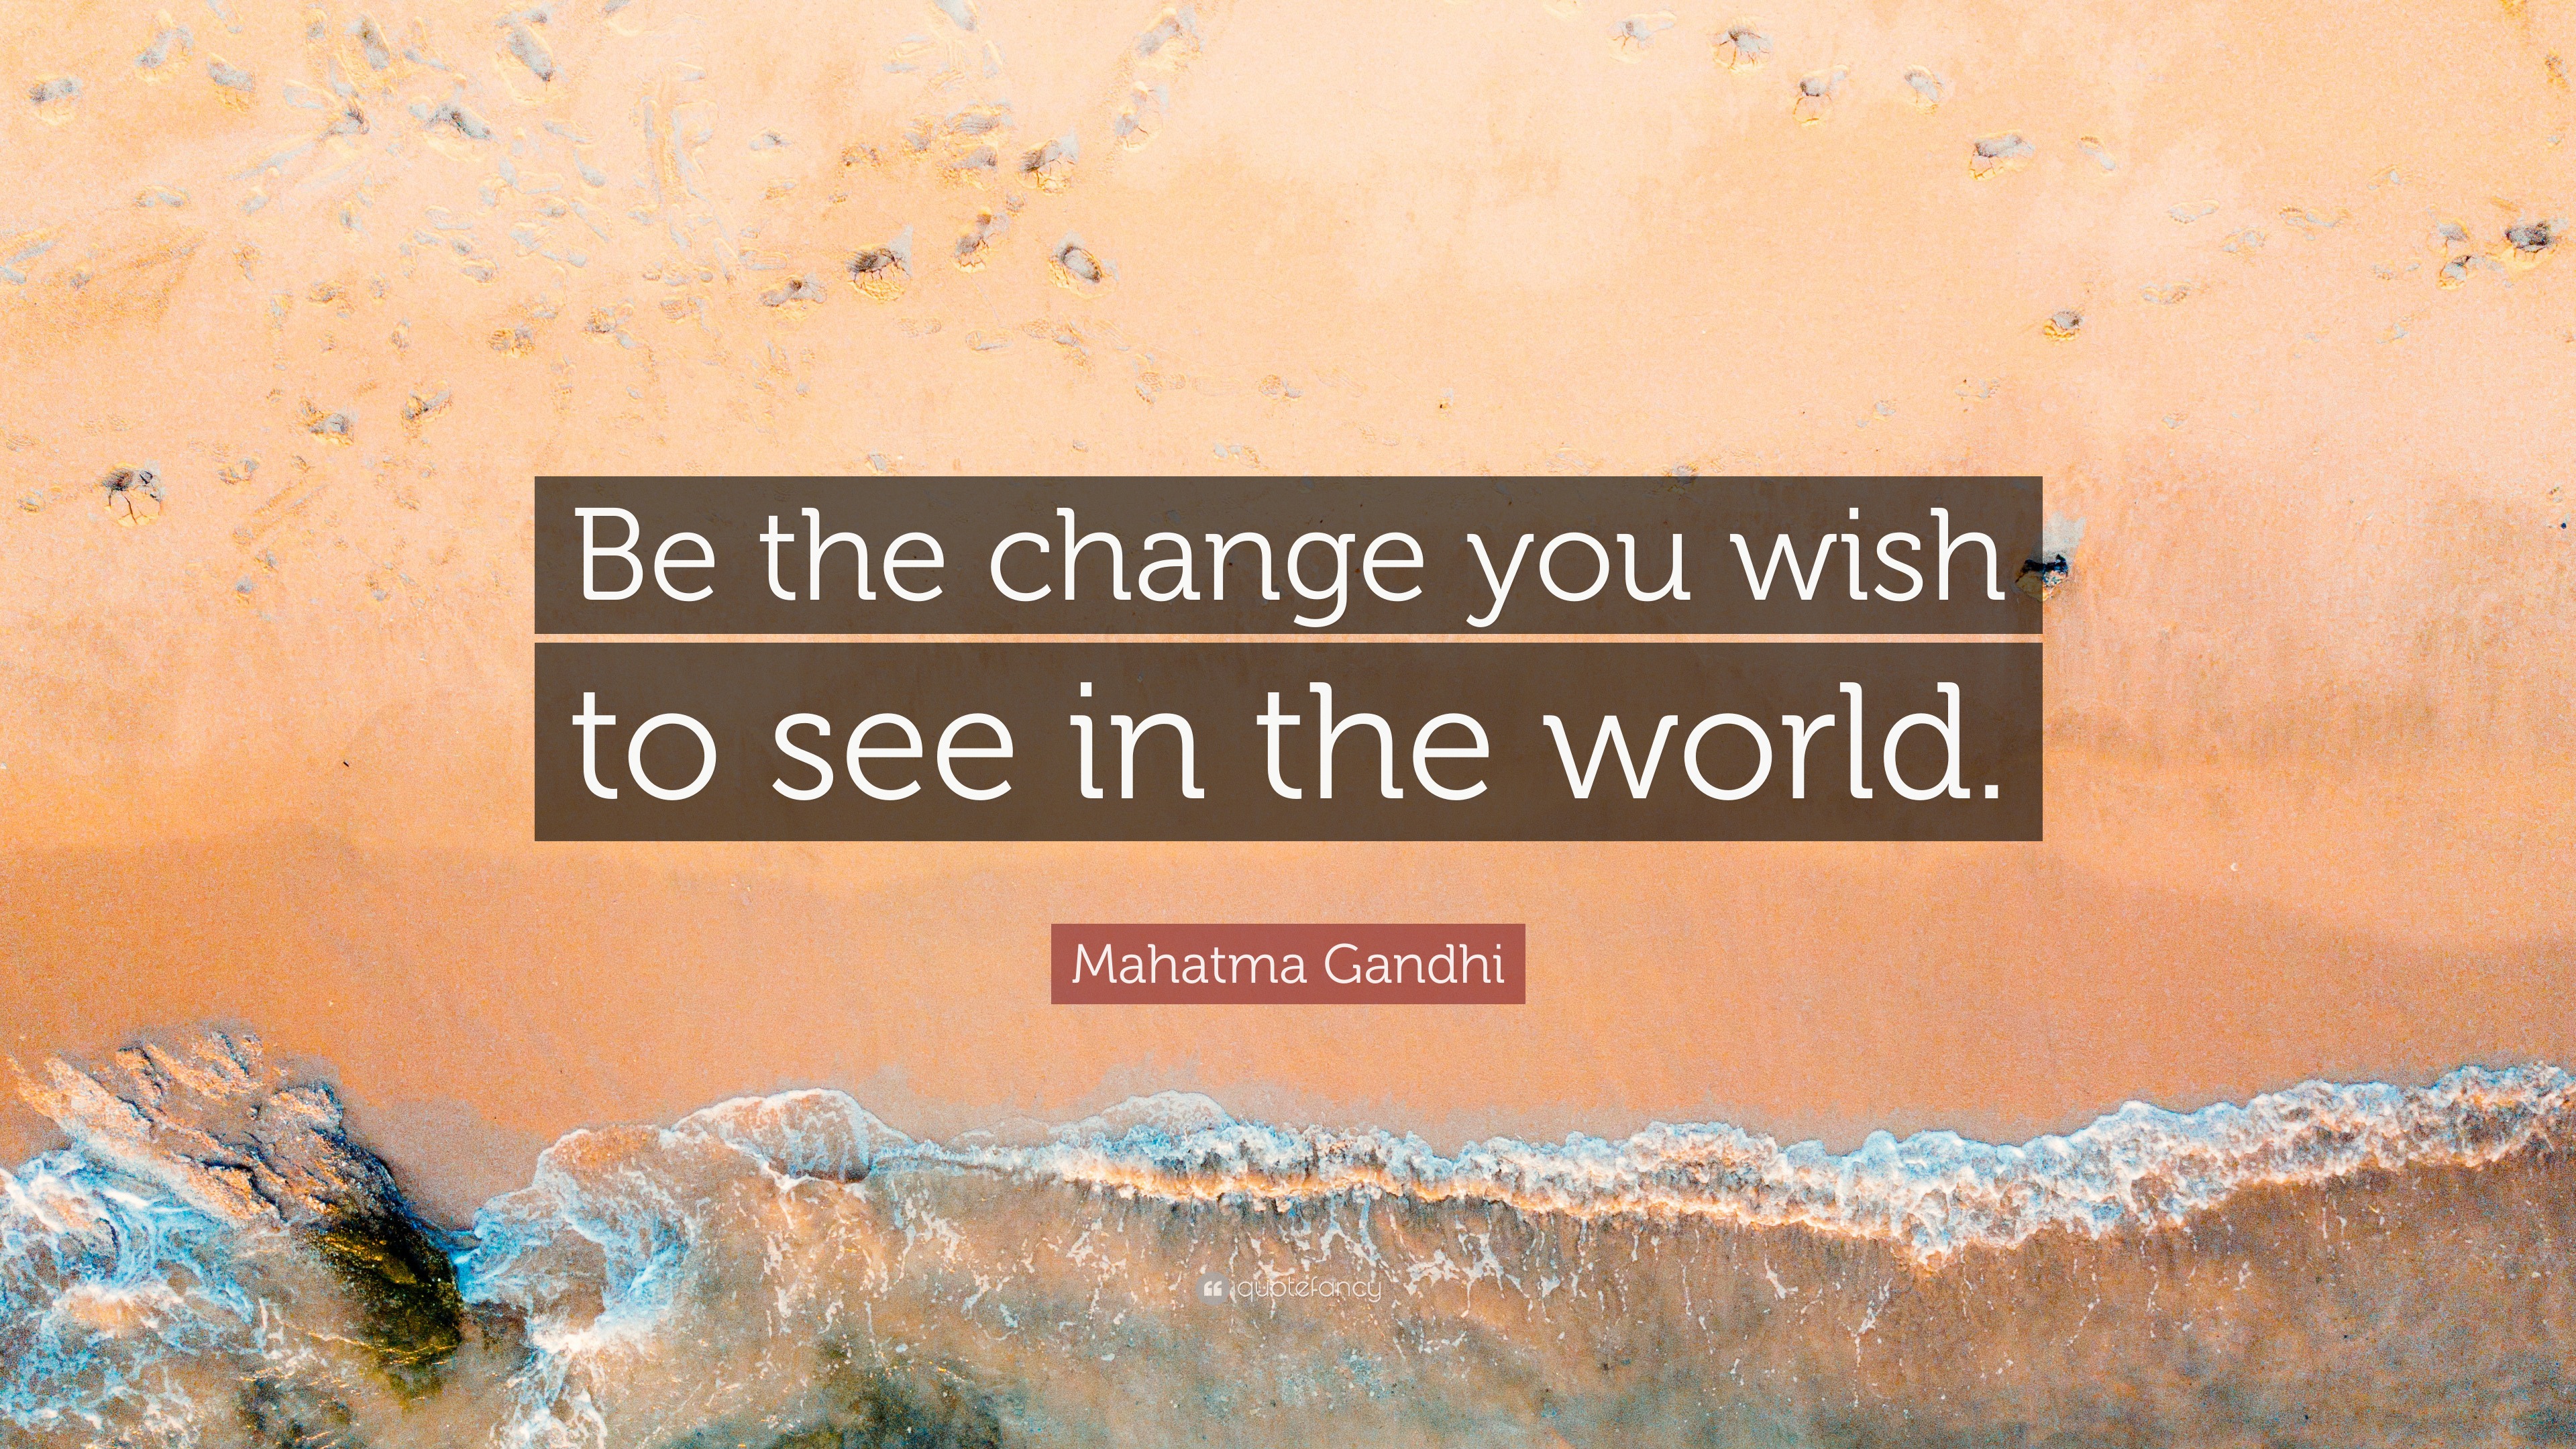 mahatma-gandhi-quote-be-the-change-that-you-wish-to-see-in-the-world